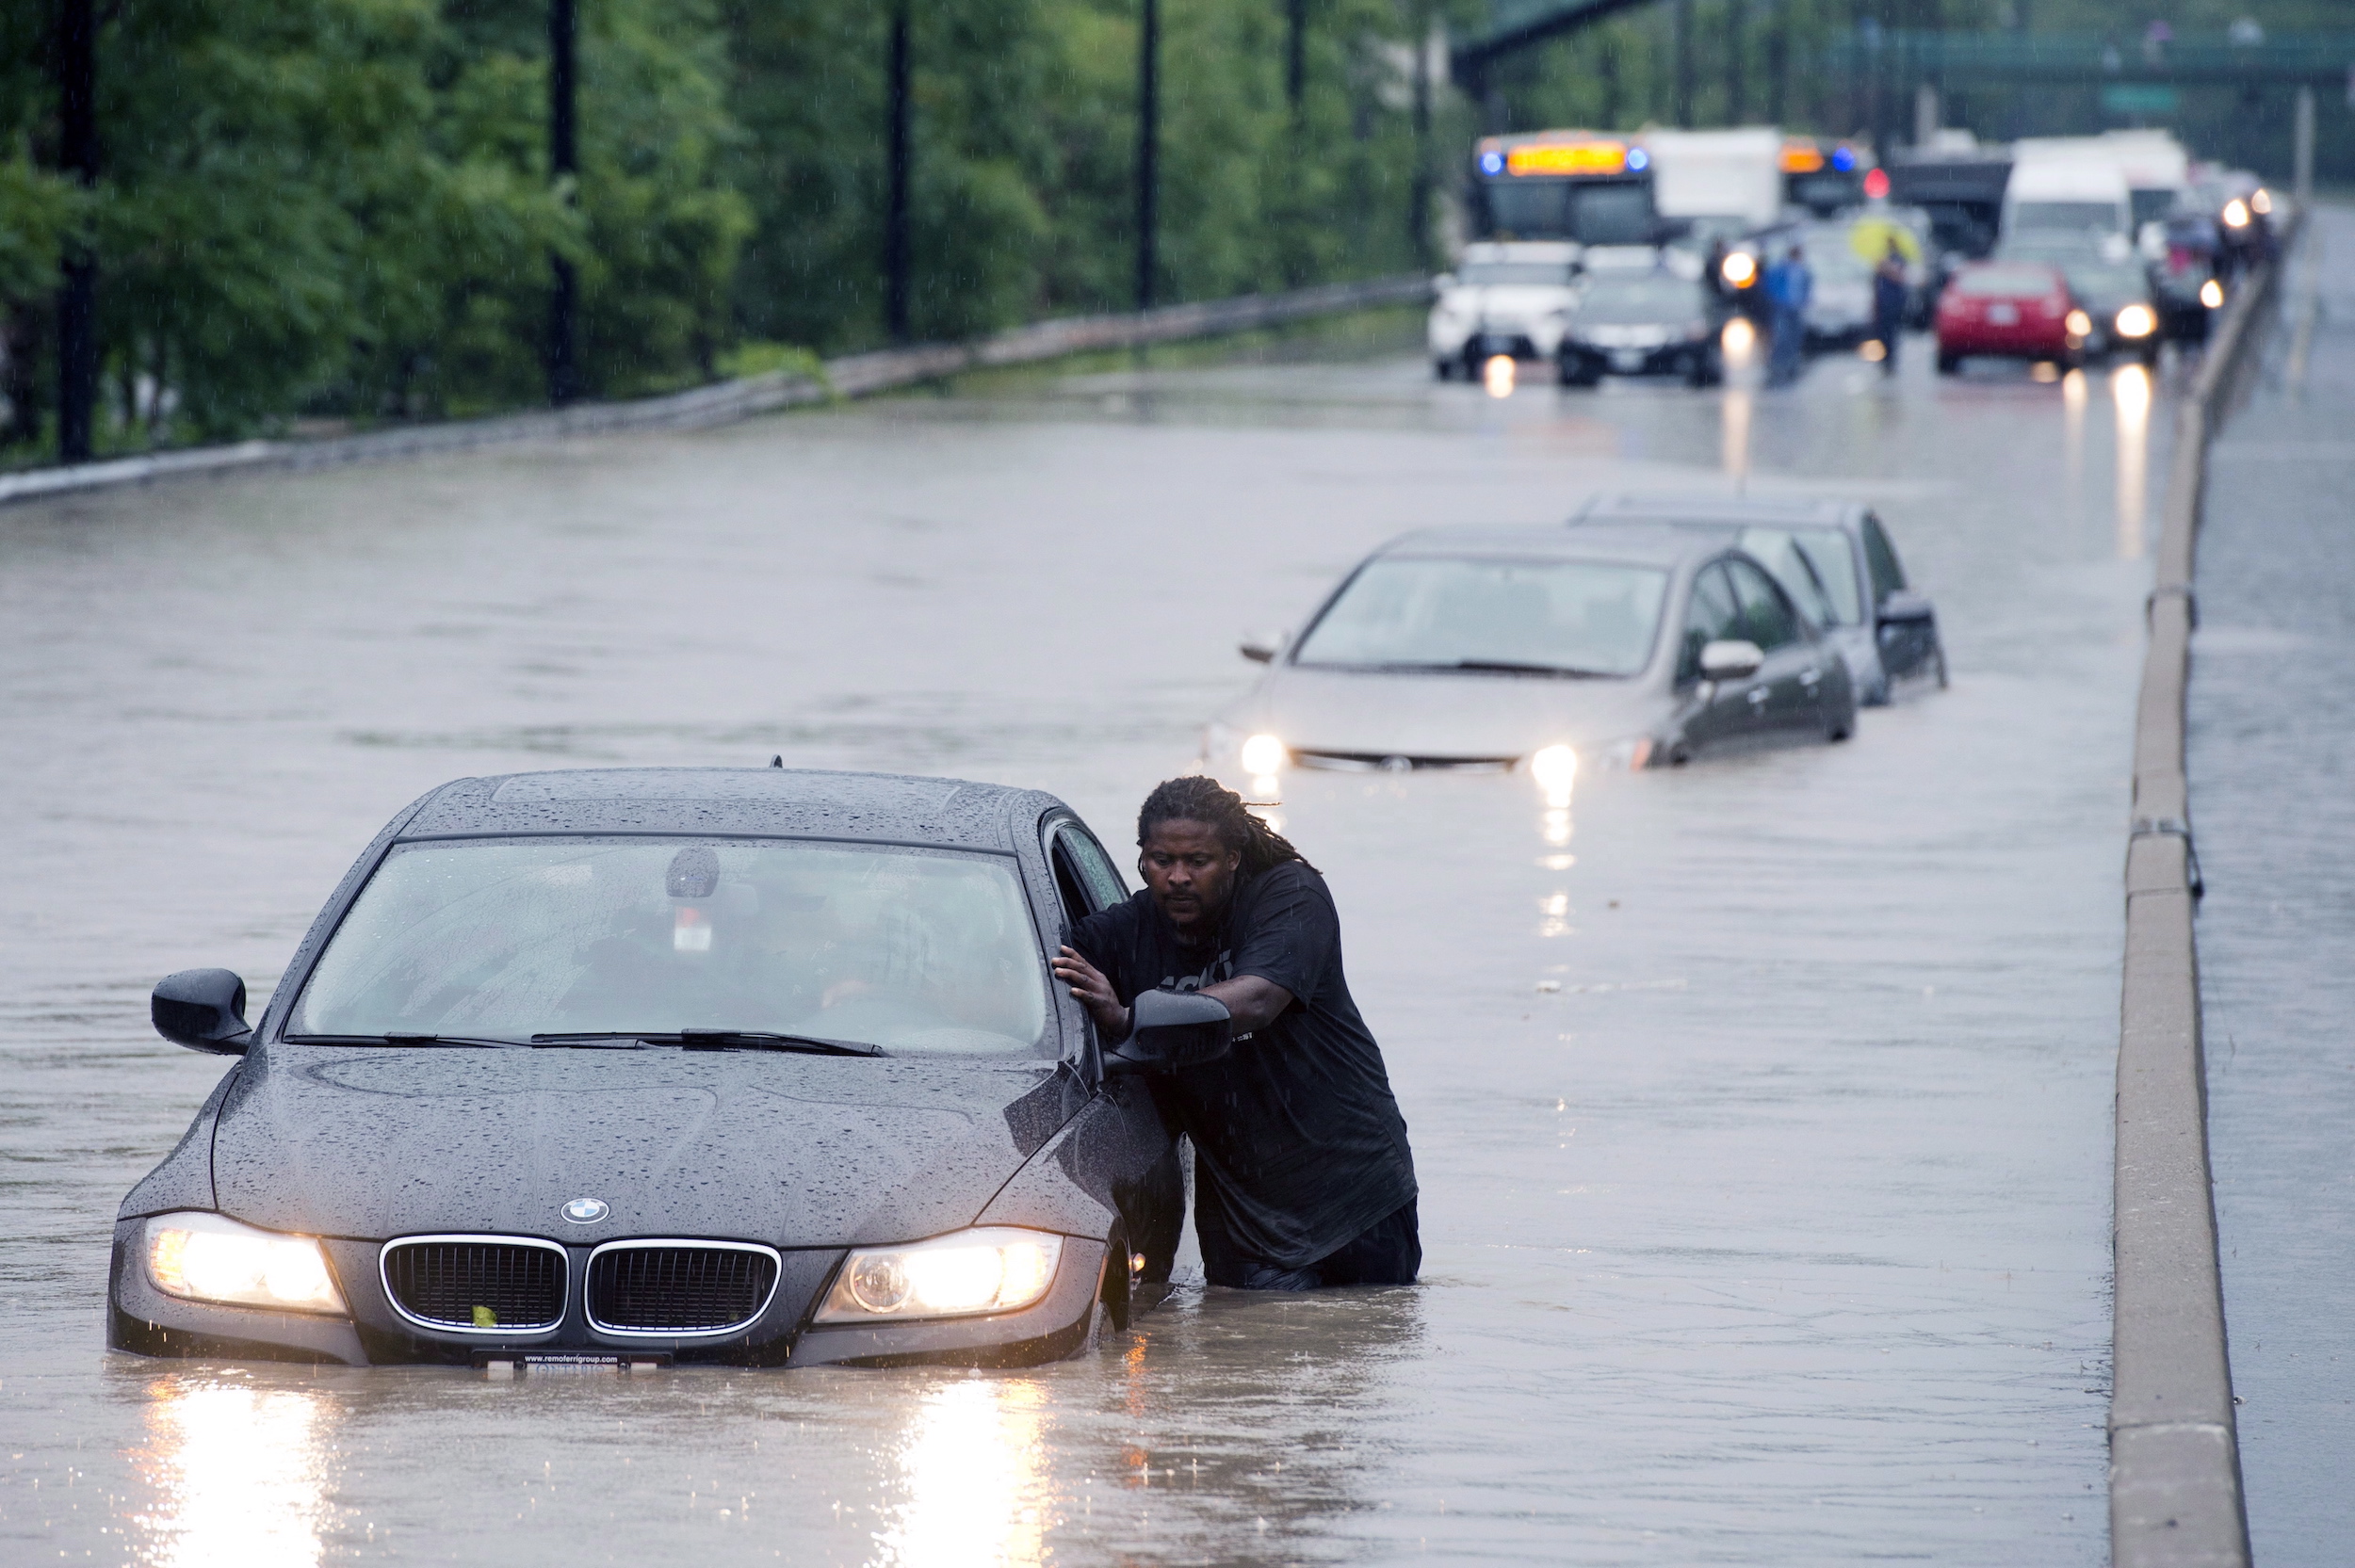 A tow truck driver floats a car out of the Don Valley Parkway in Toronto on Monday, July 8 2013.